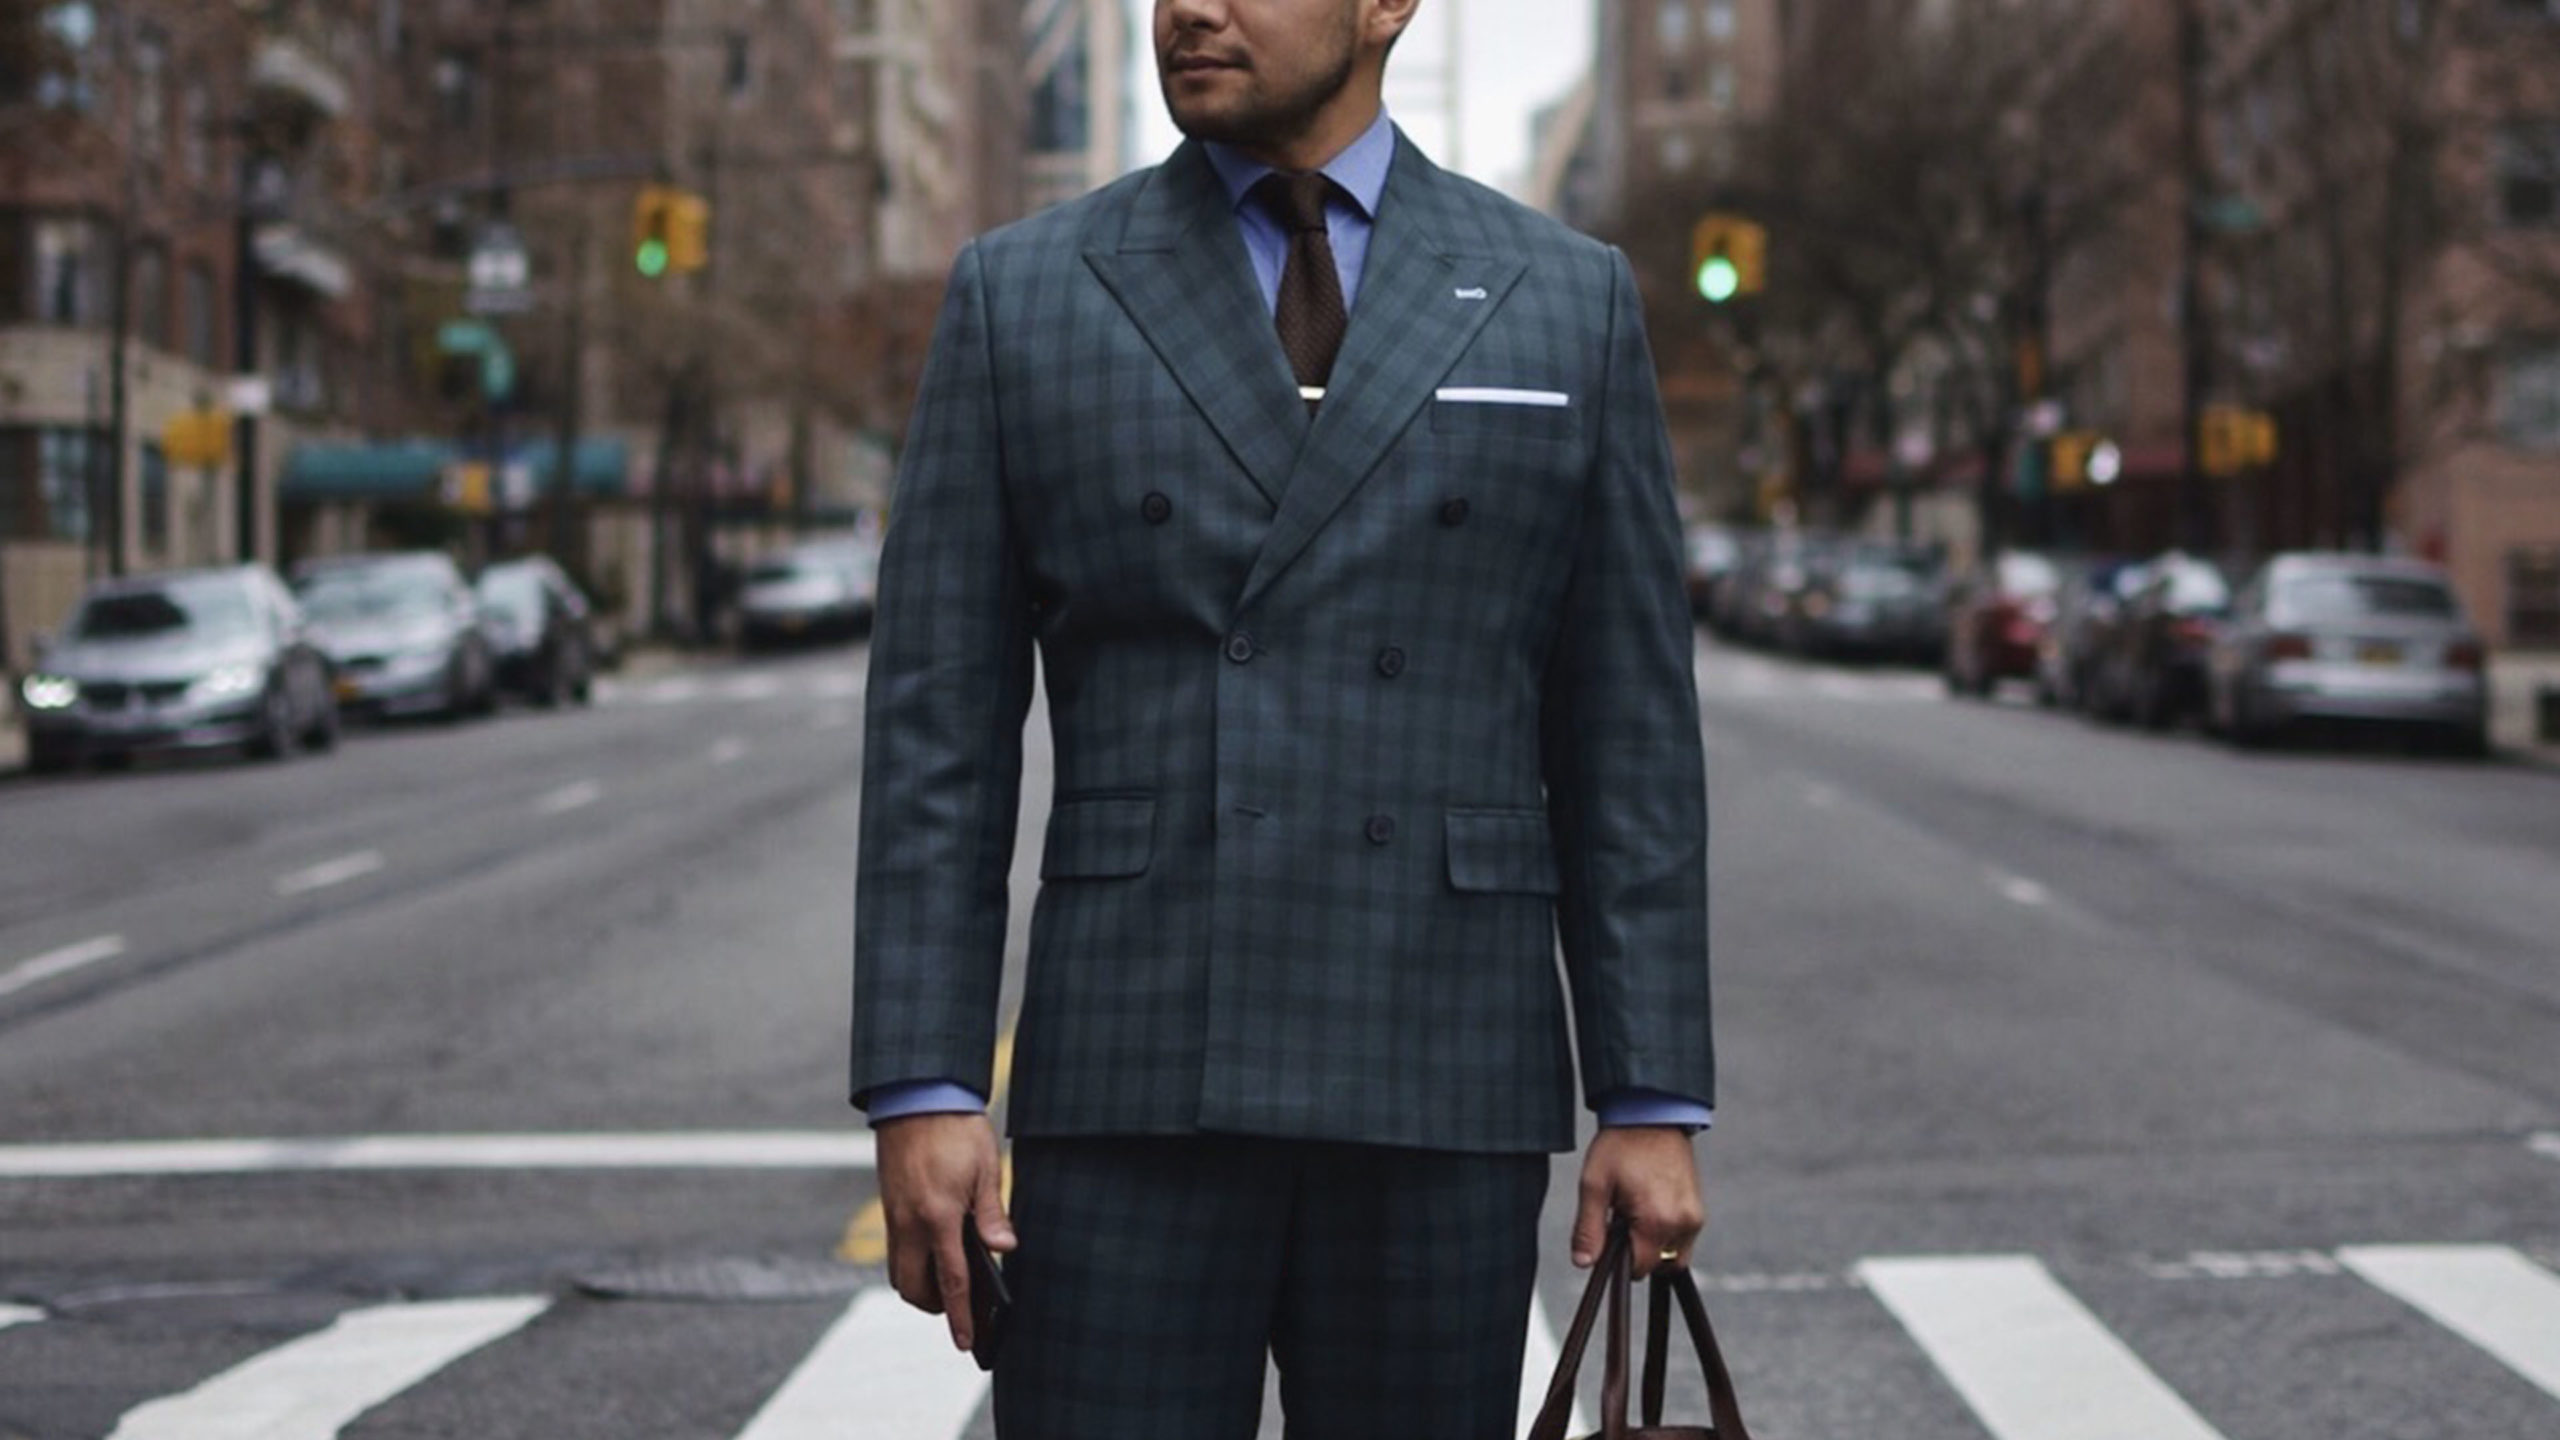 HOW TO DRESS BETTER AND BOOST YOUR CONFIDENCE - green double breasted suit - dandy in the bronx